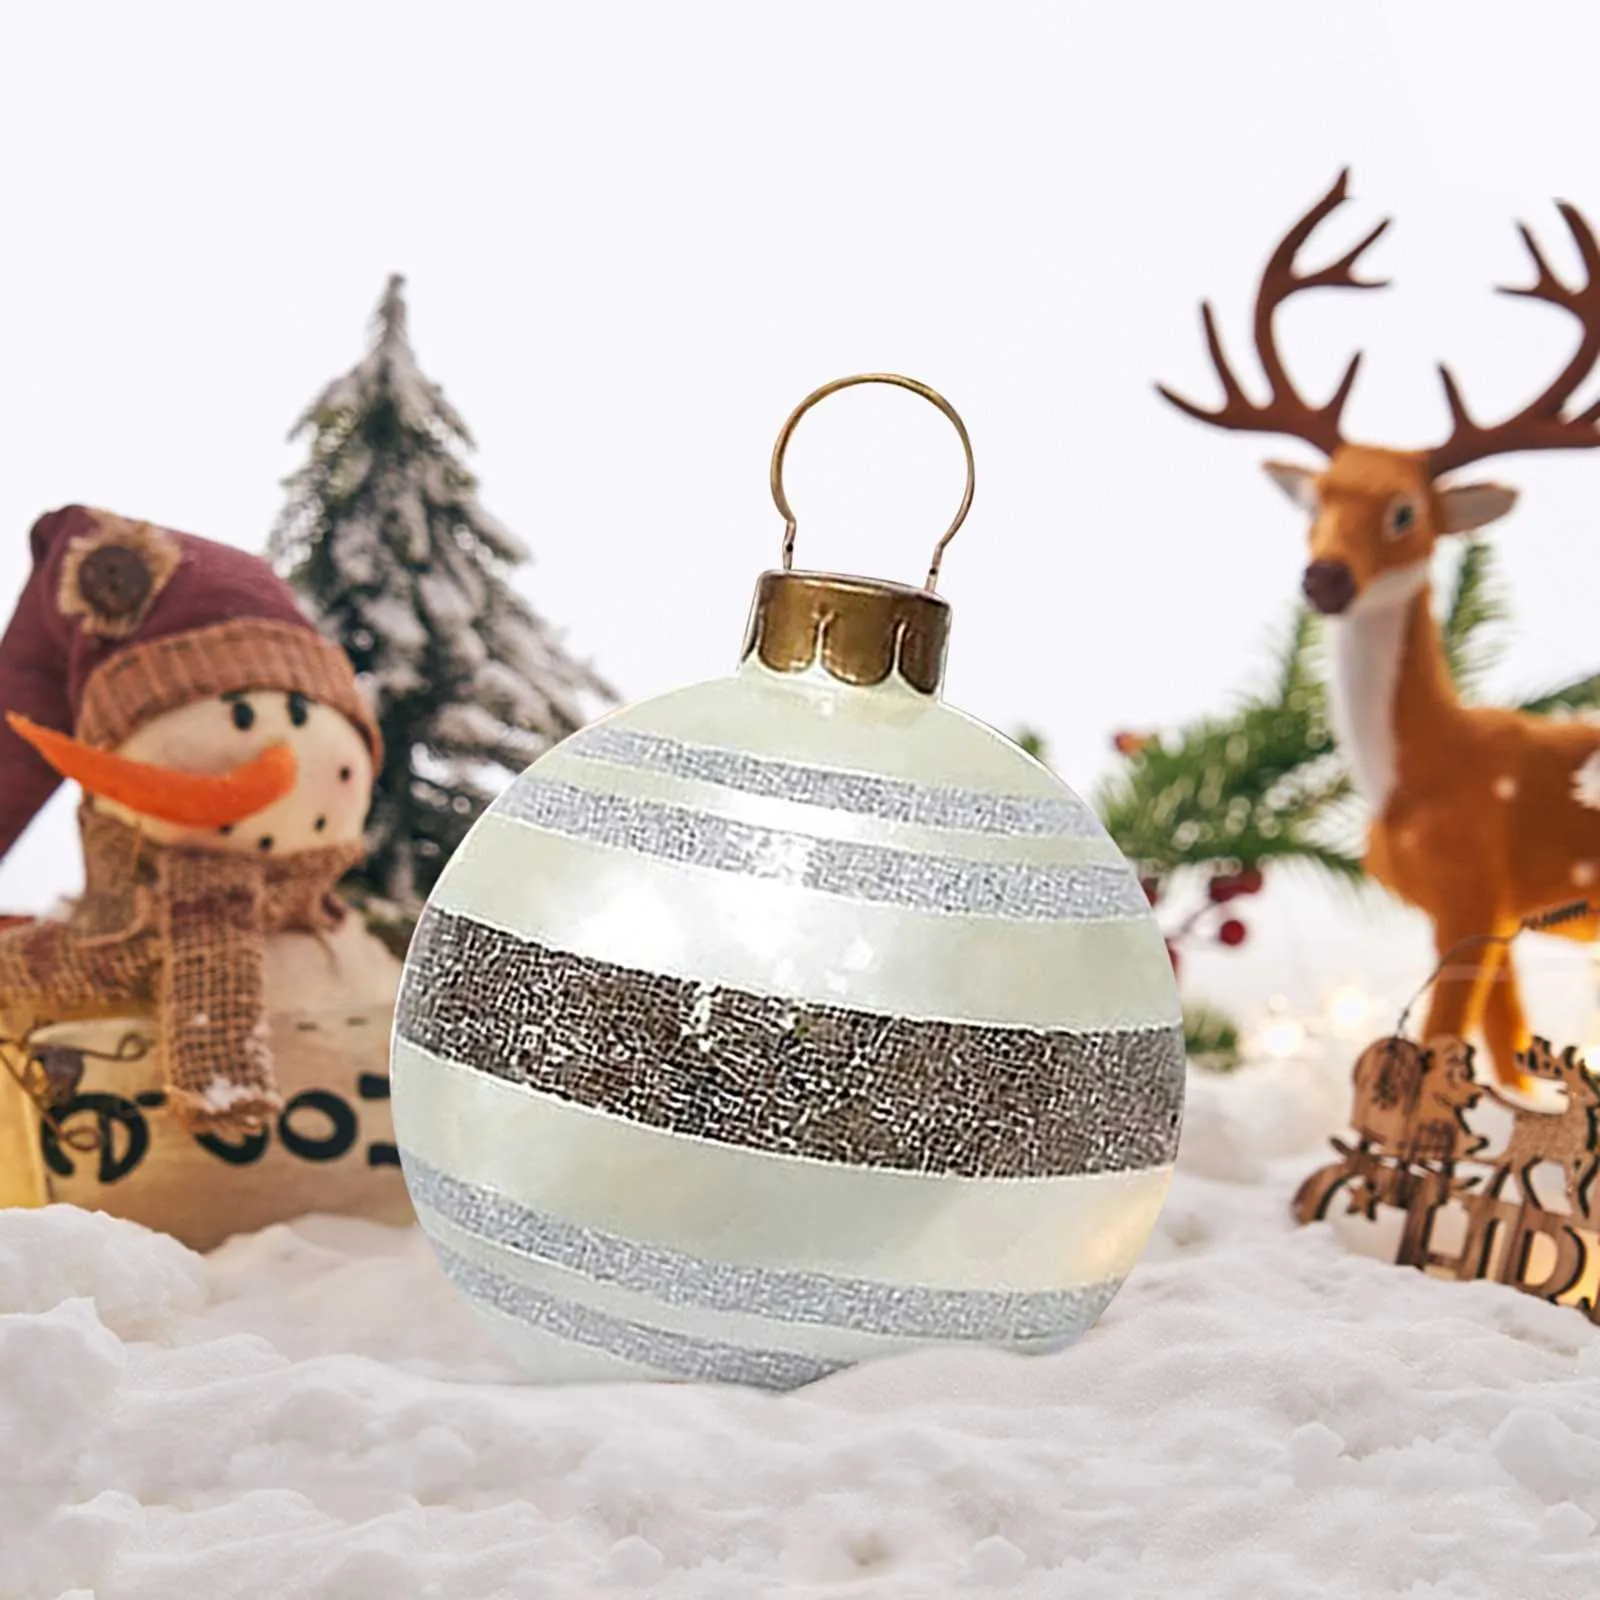 Outdoor Christmas Inflatable Decorated Ball Made of PVC 23 6 inch Giant Tree Decorations Holiday Decor 211018250Y